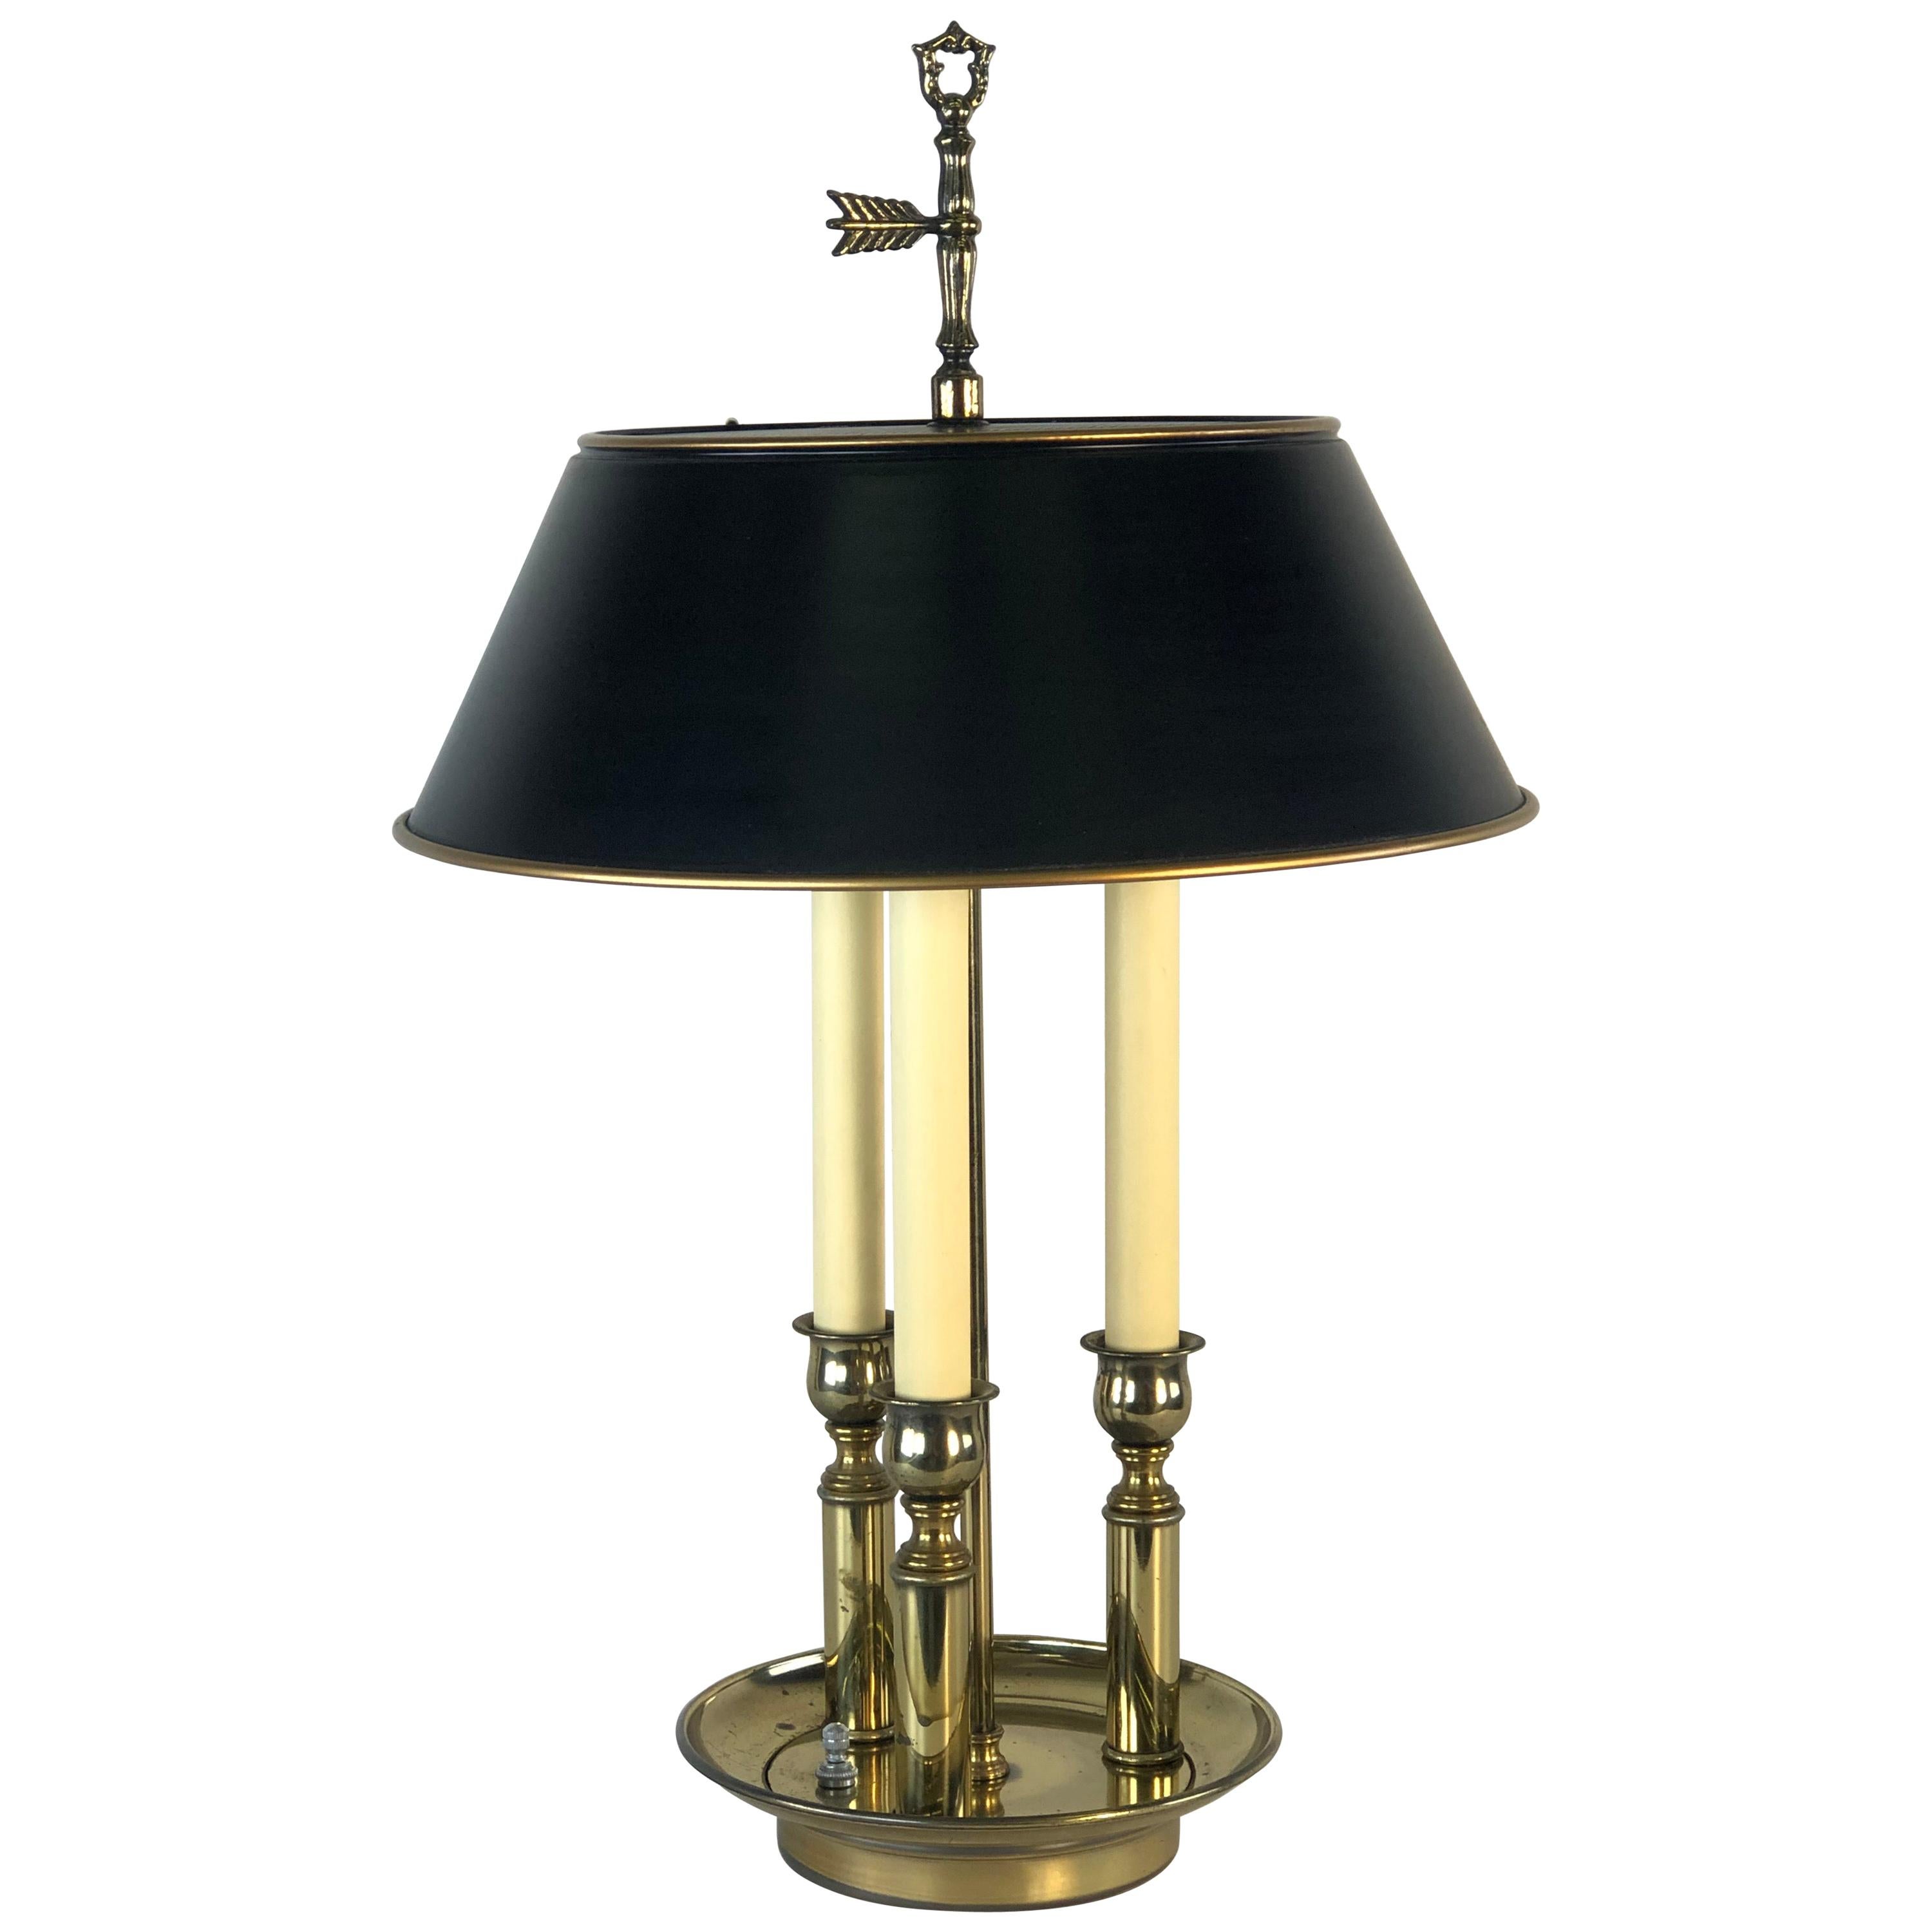 Mid-20th Century Black and Gold Metal Bouillotte Table Lamp